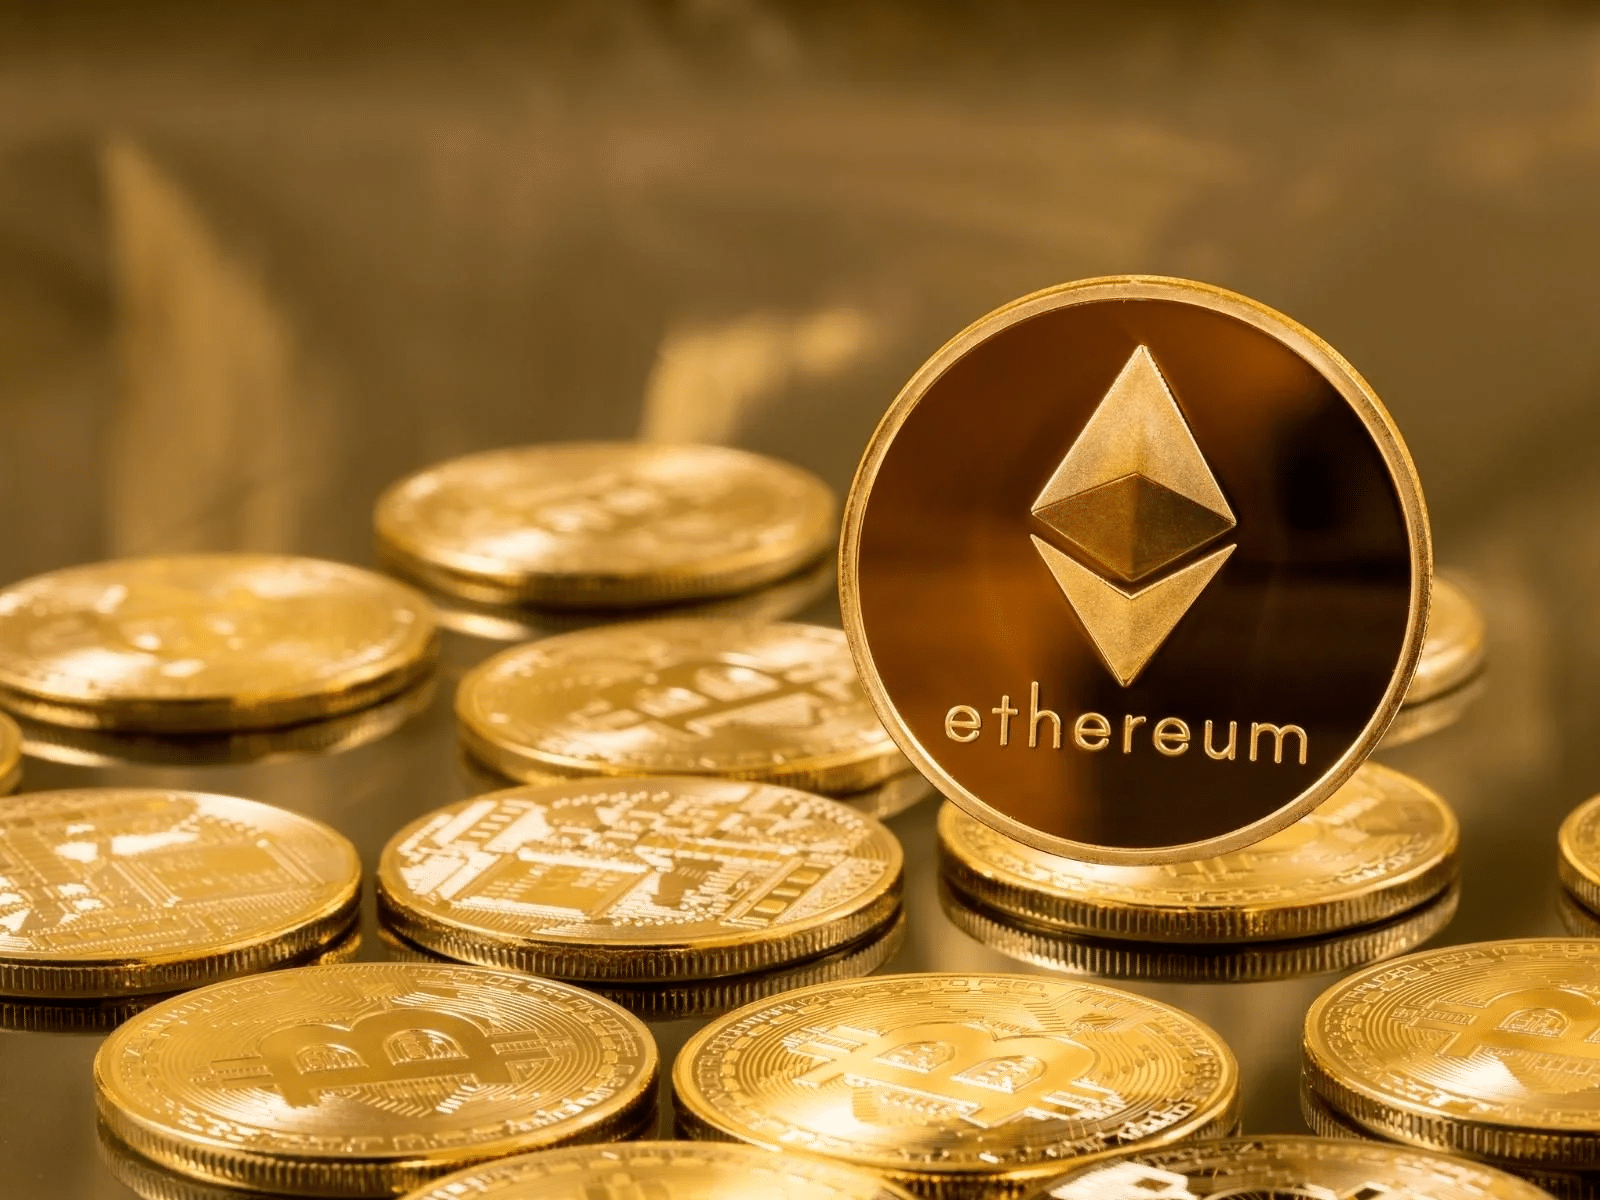 How to Find New Cryptocurrencies for Investment